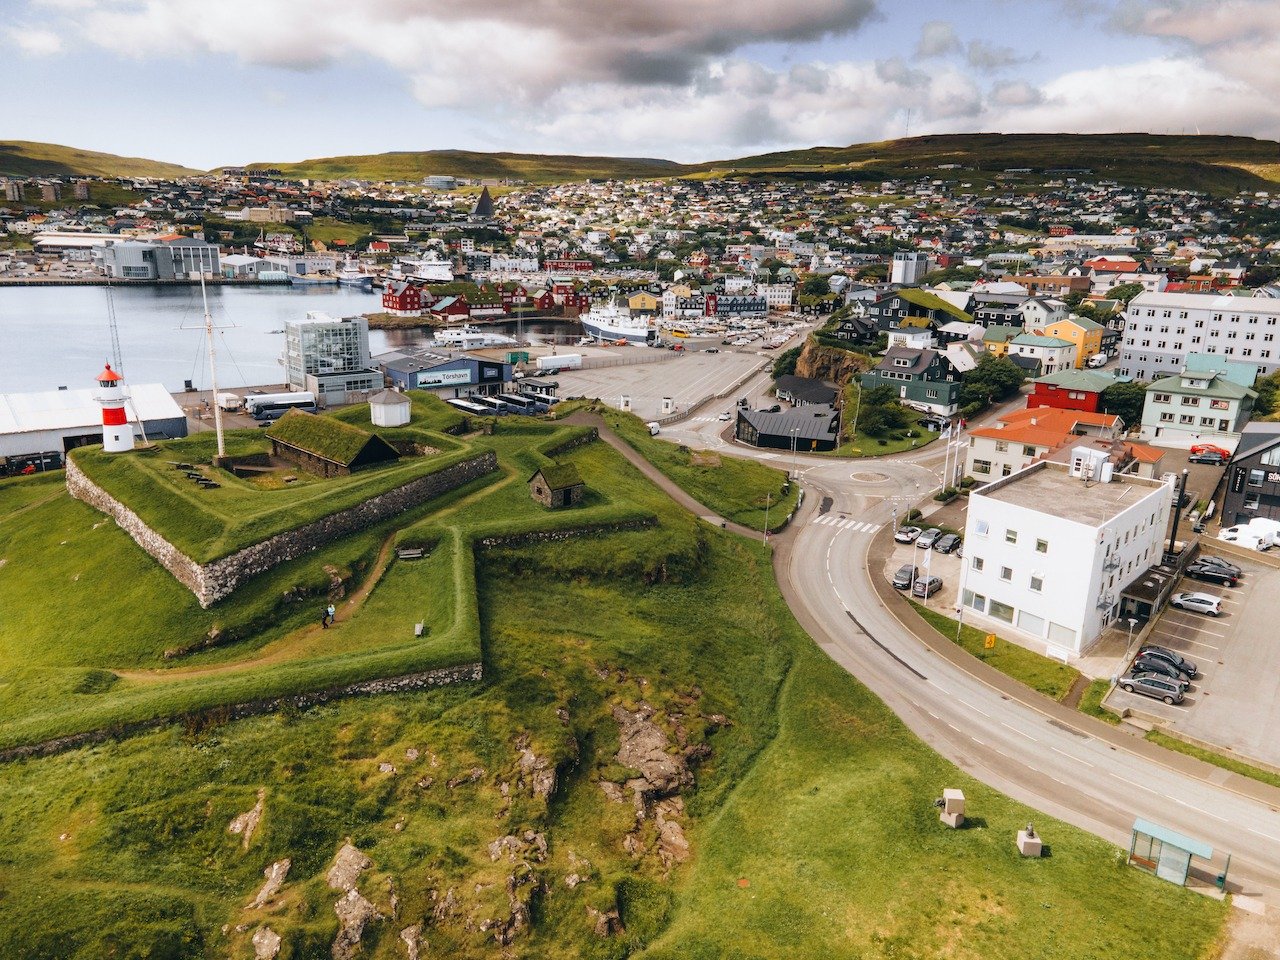 📍 T&oacute;rshavn, Faroe Islands

Such an awesome capital city in the Faroe Islands. In the middle of this harbor, where the turfed buildings are, is actually the home of the Faroese Parliament. The city is home to most of the Faroese residents but 